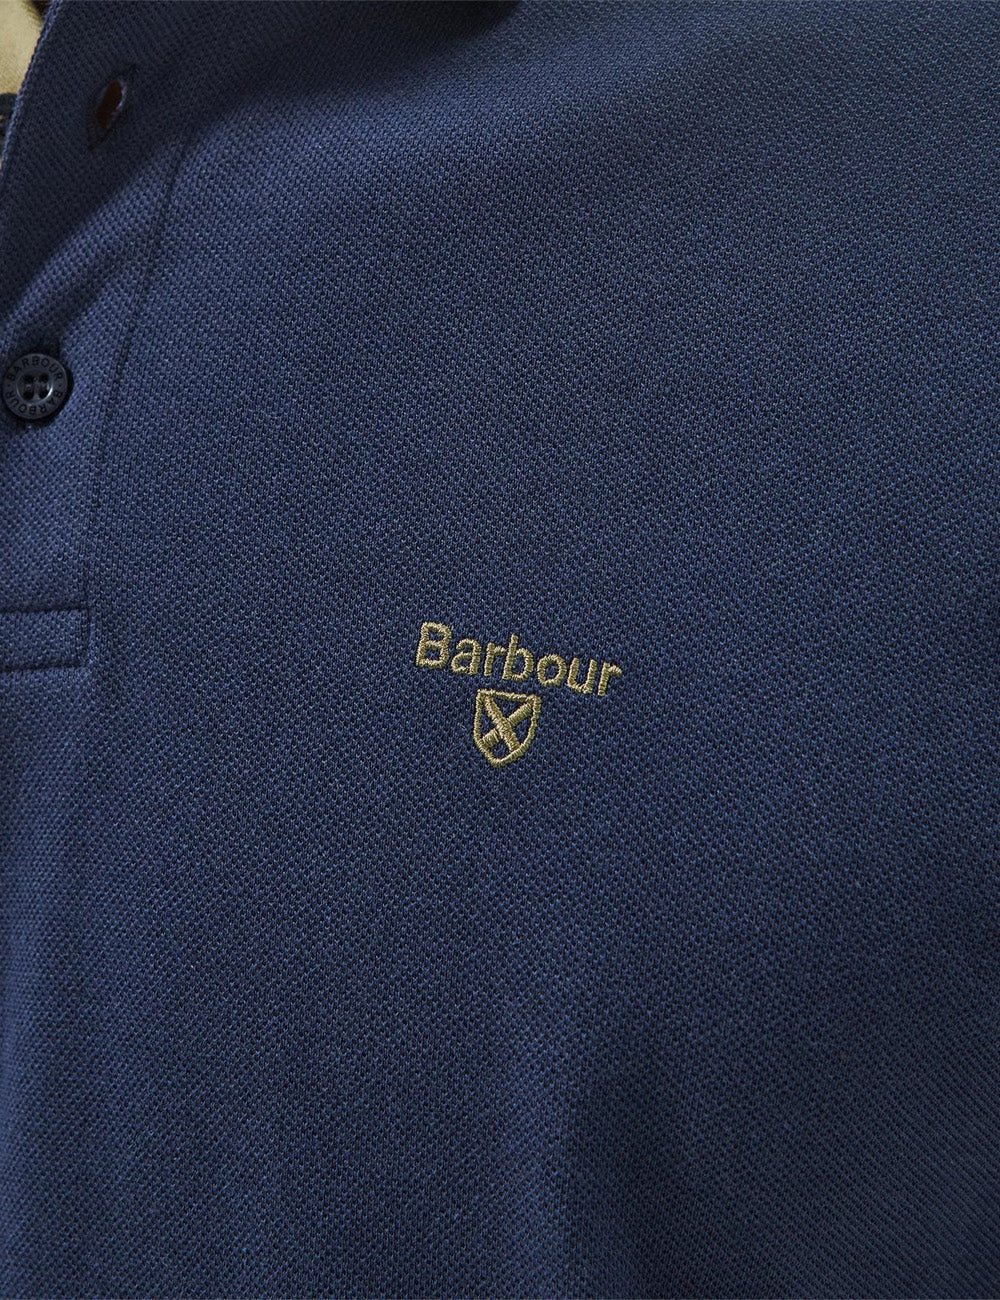 Barbour Confor Long Sleeve Polo Shirt - Navy